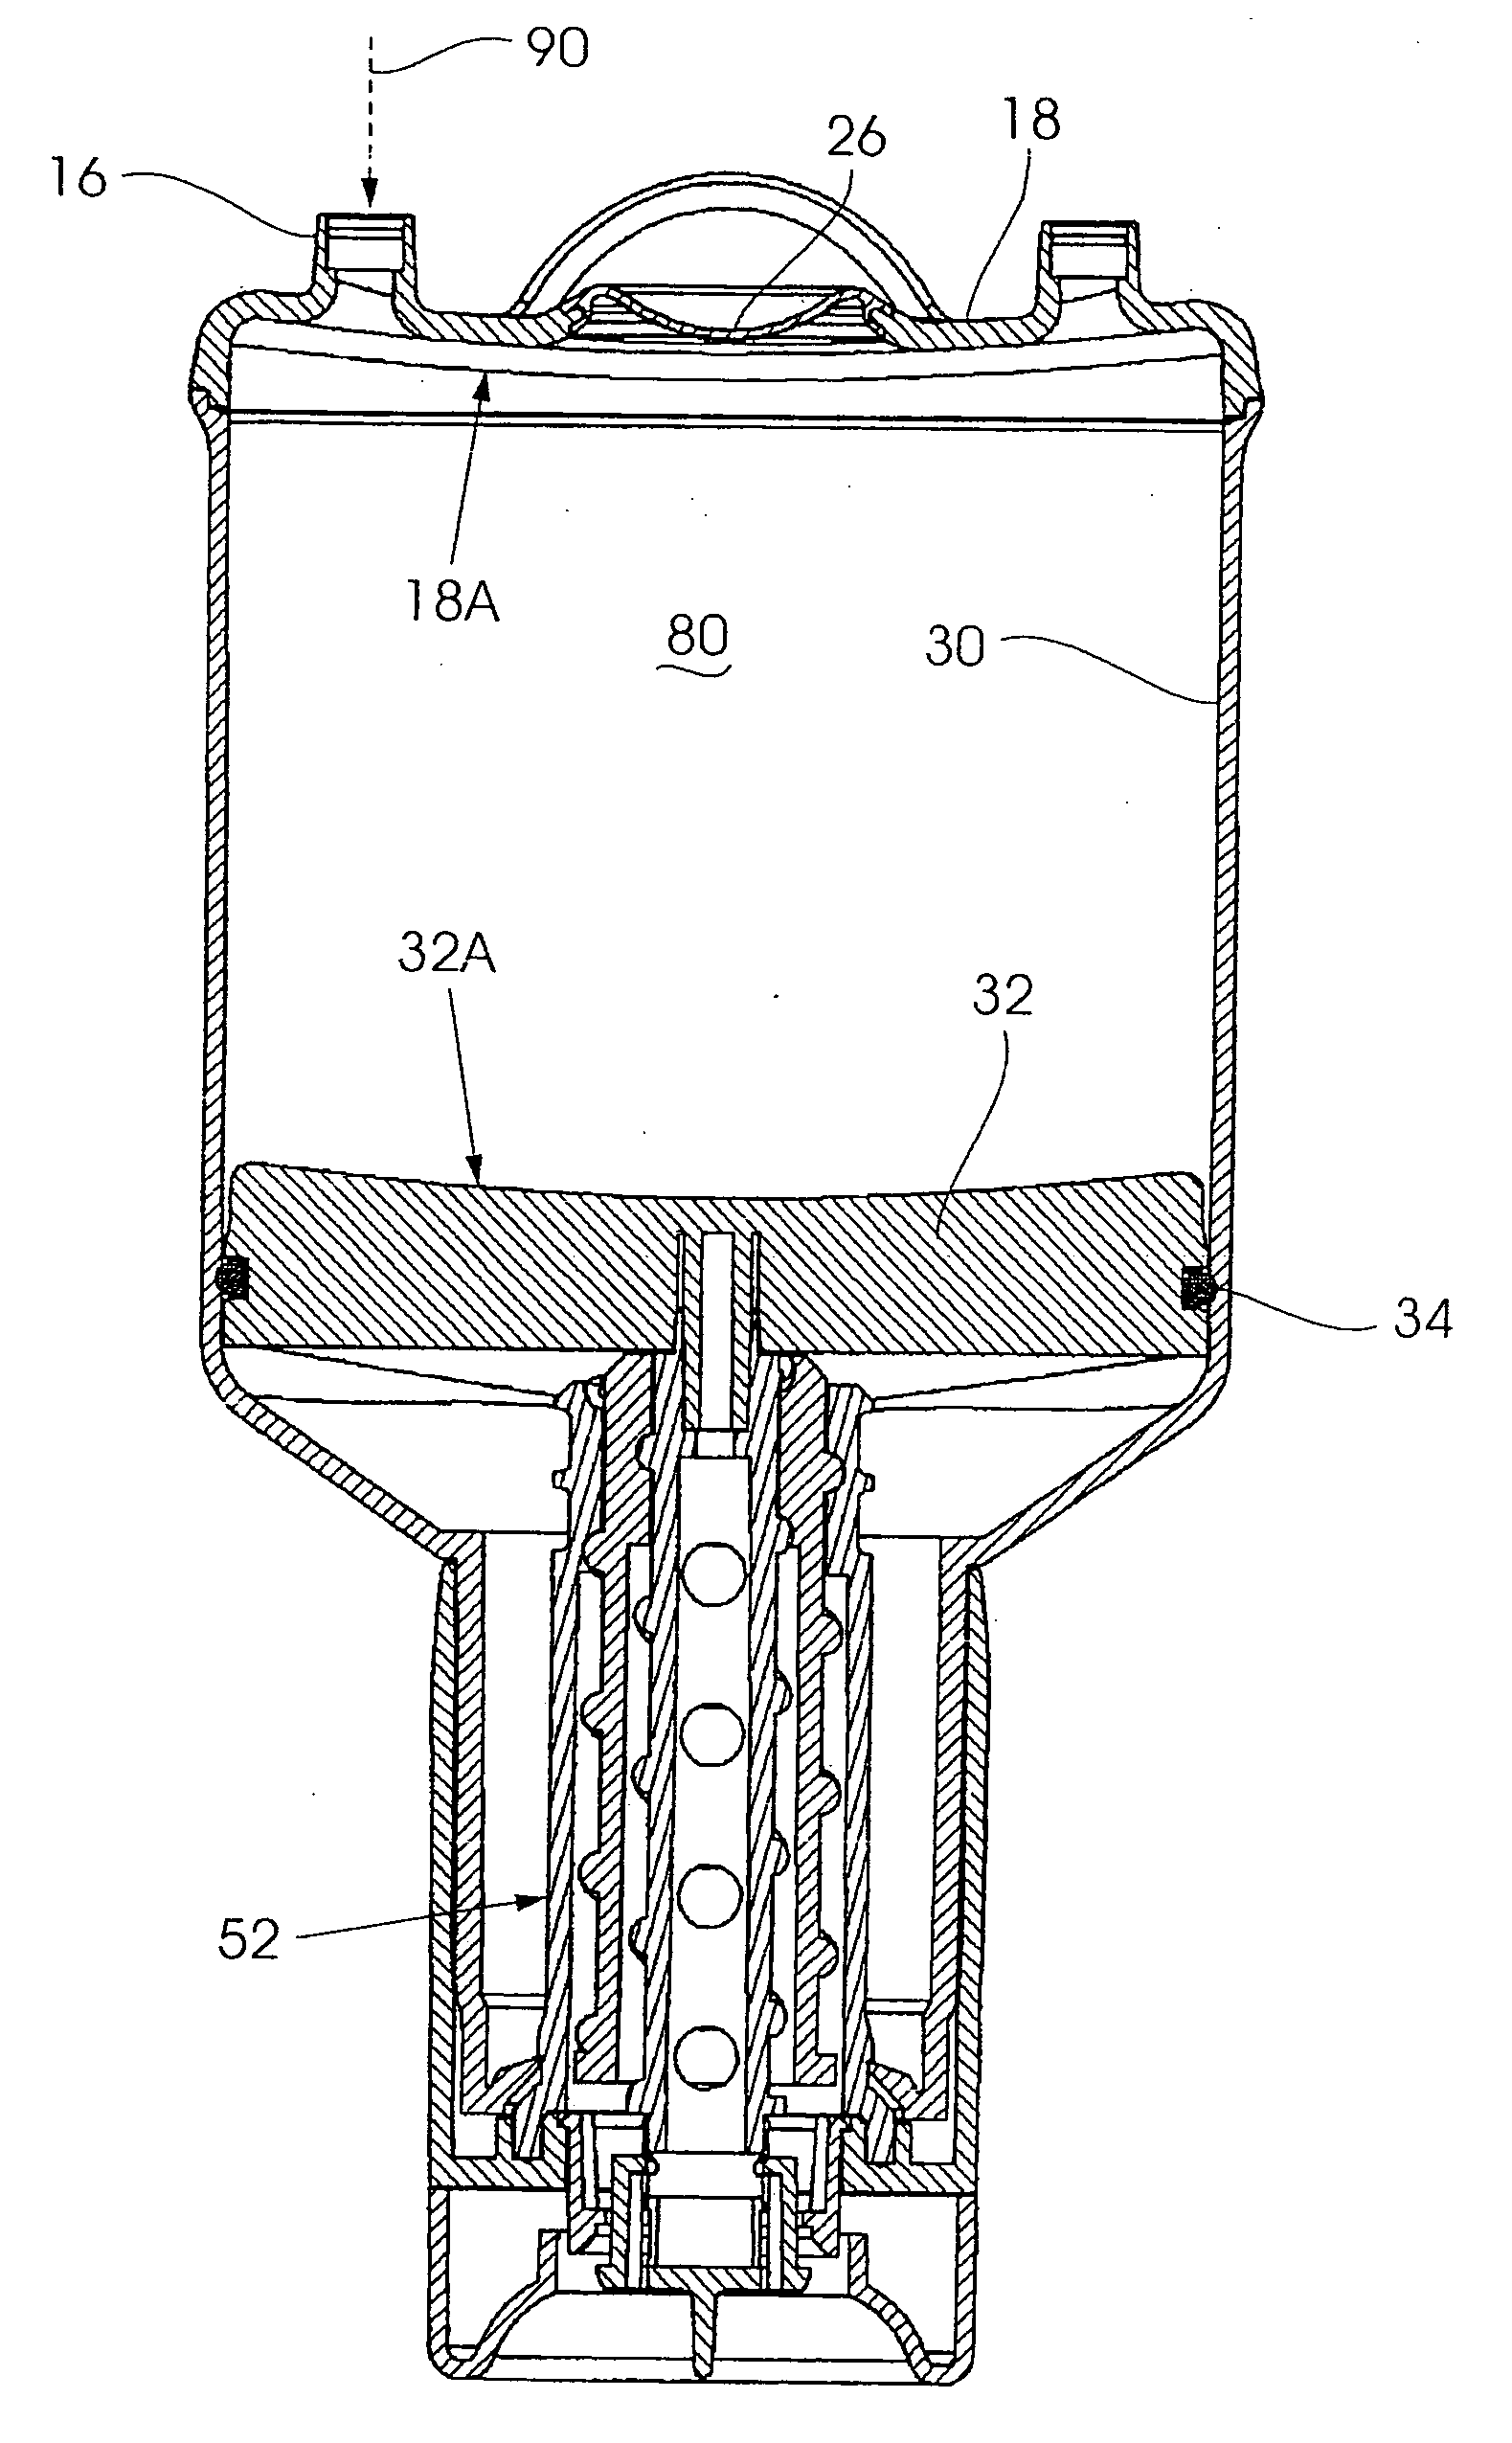 Closed wound drainage system